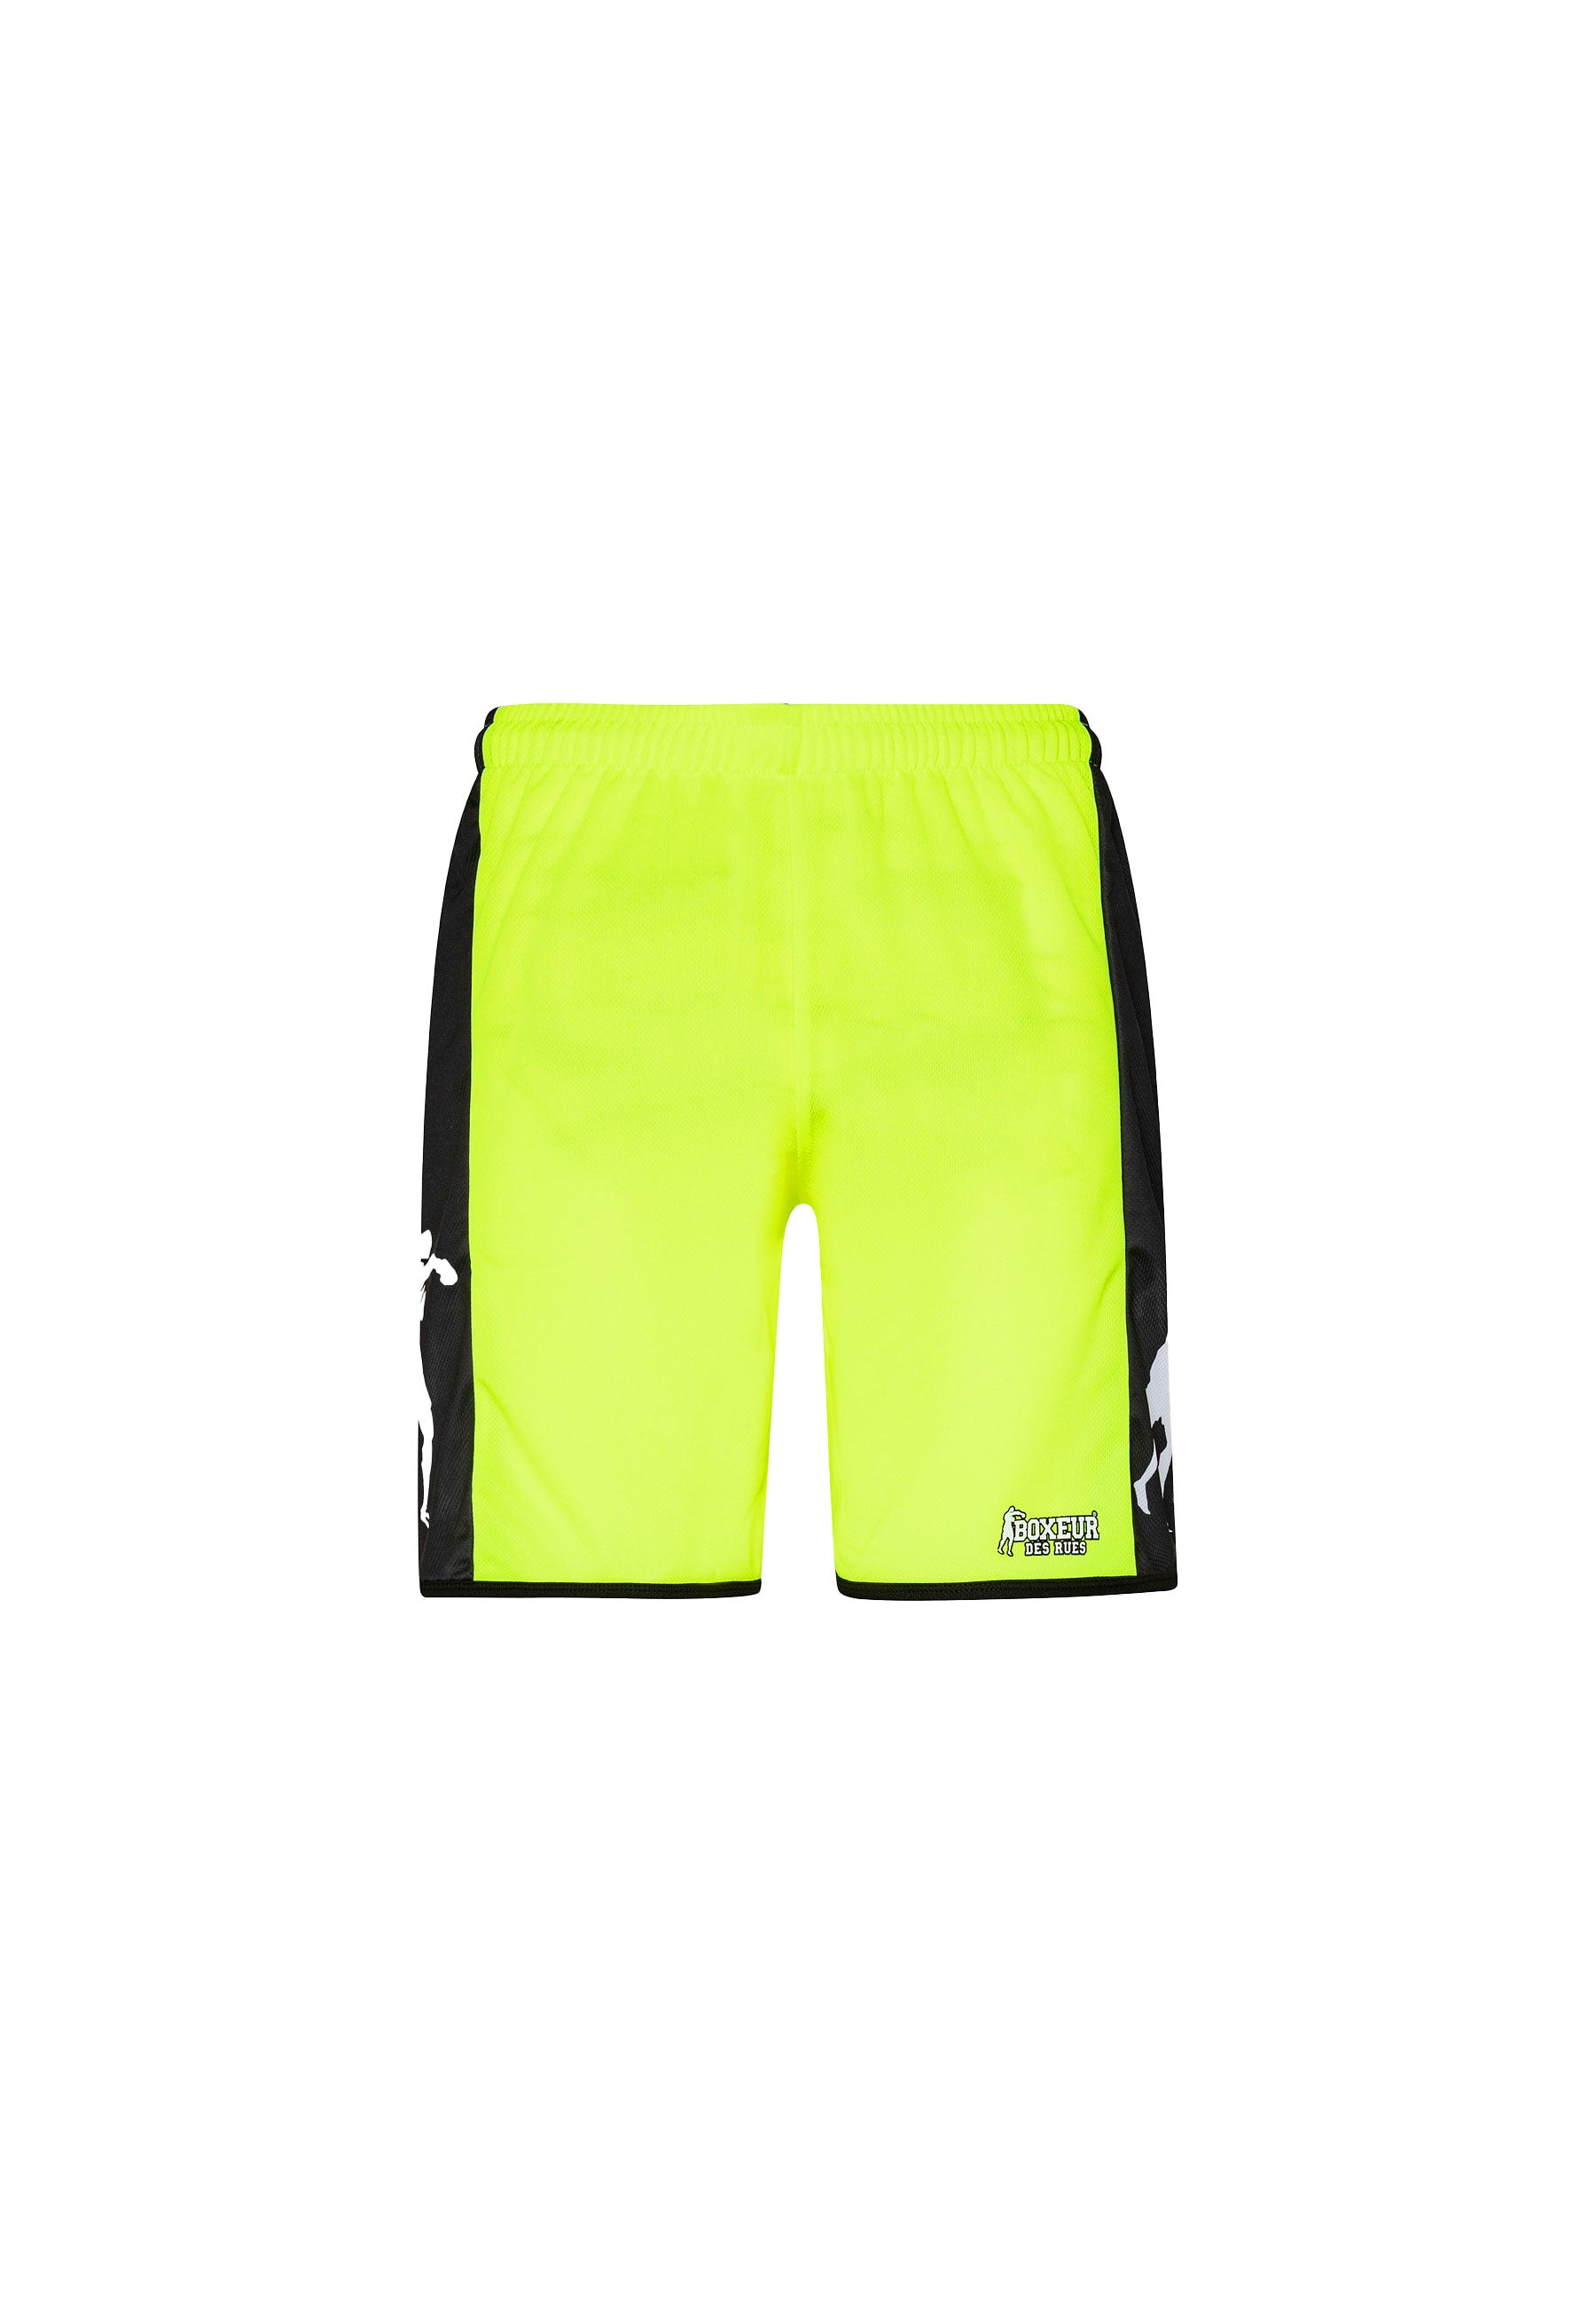 Soccer Basic Shorts in Yellow Shorts Boxeur des Rues   